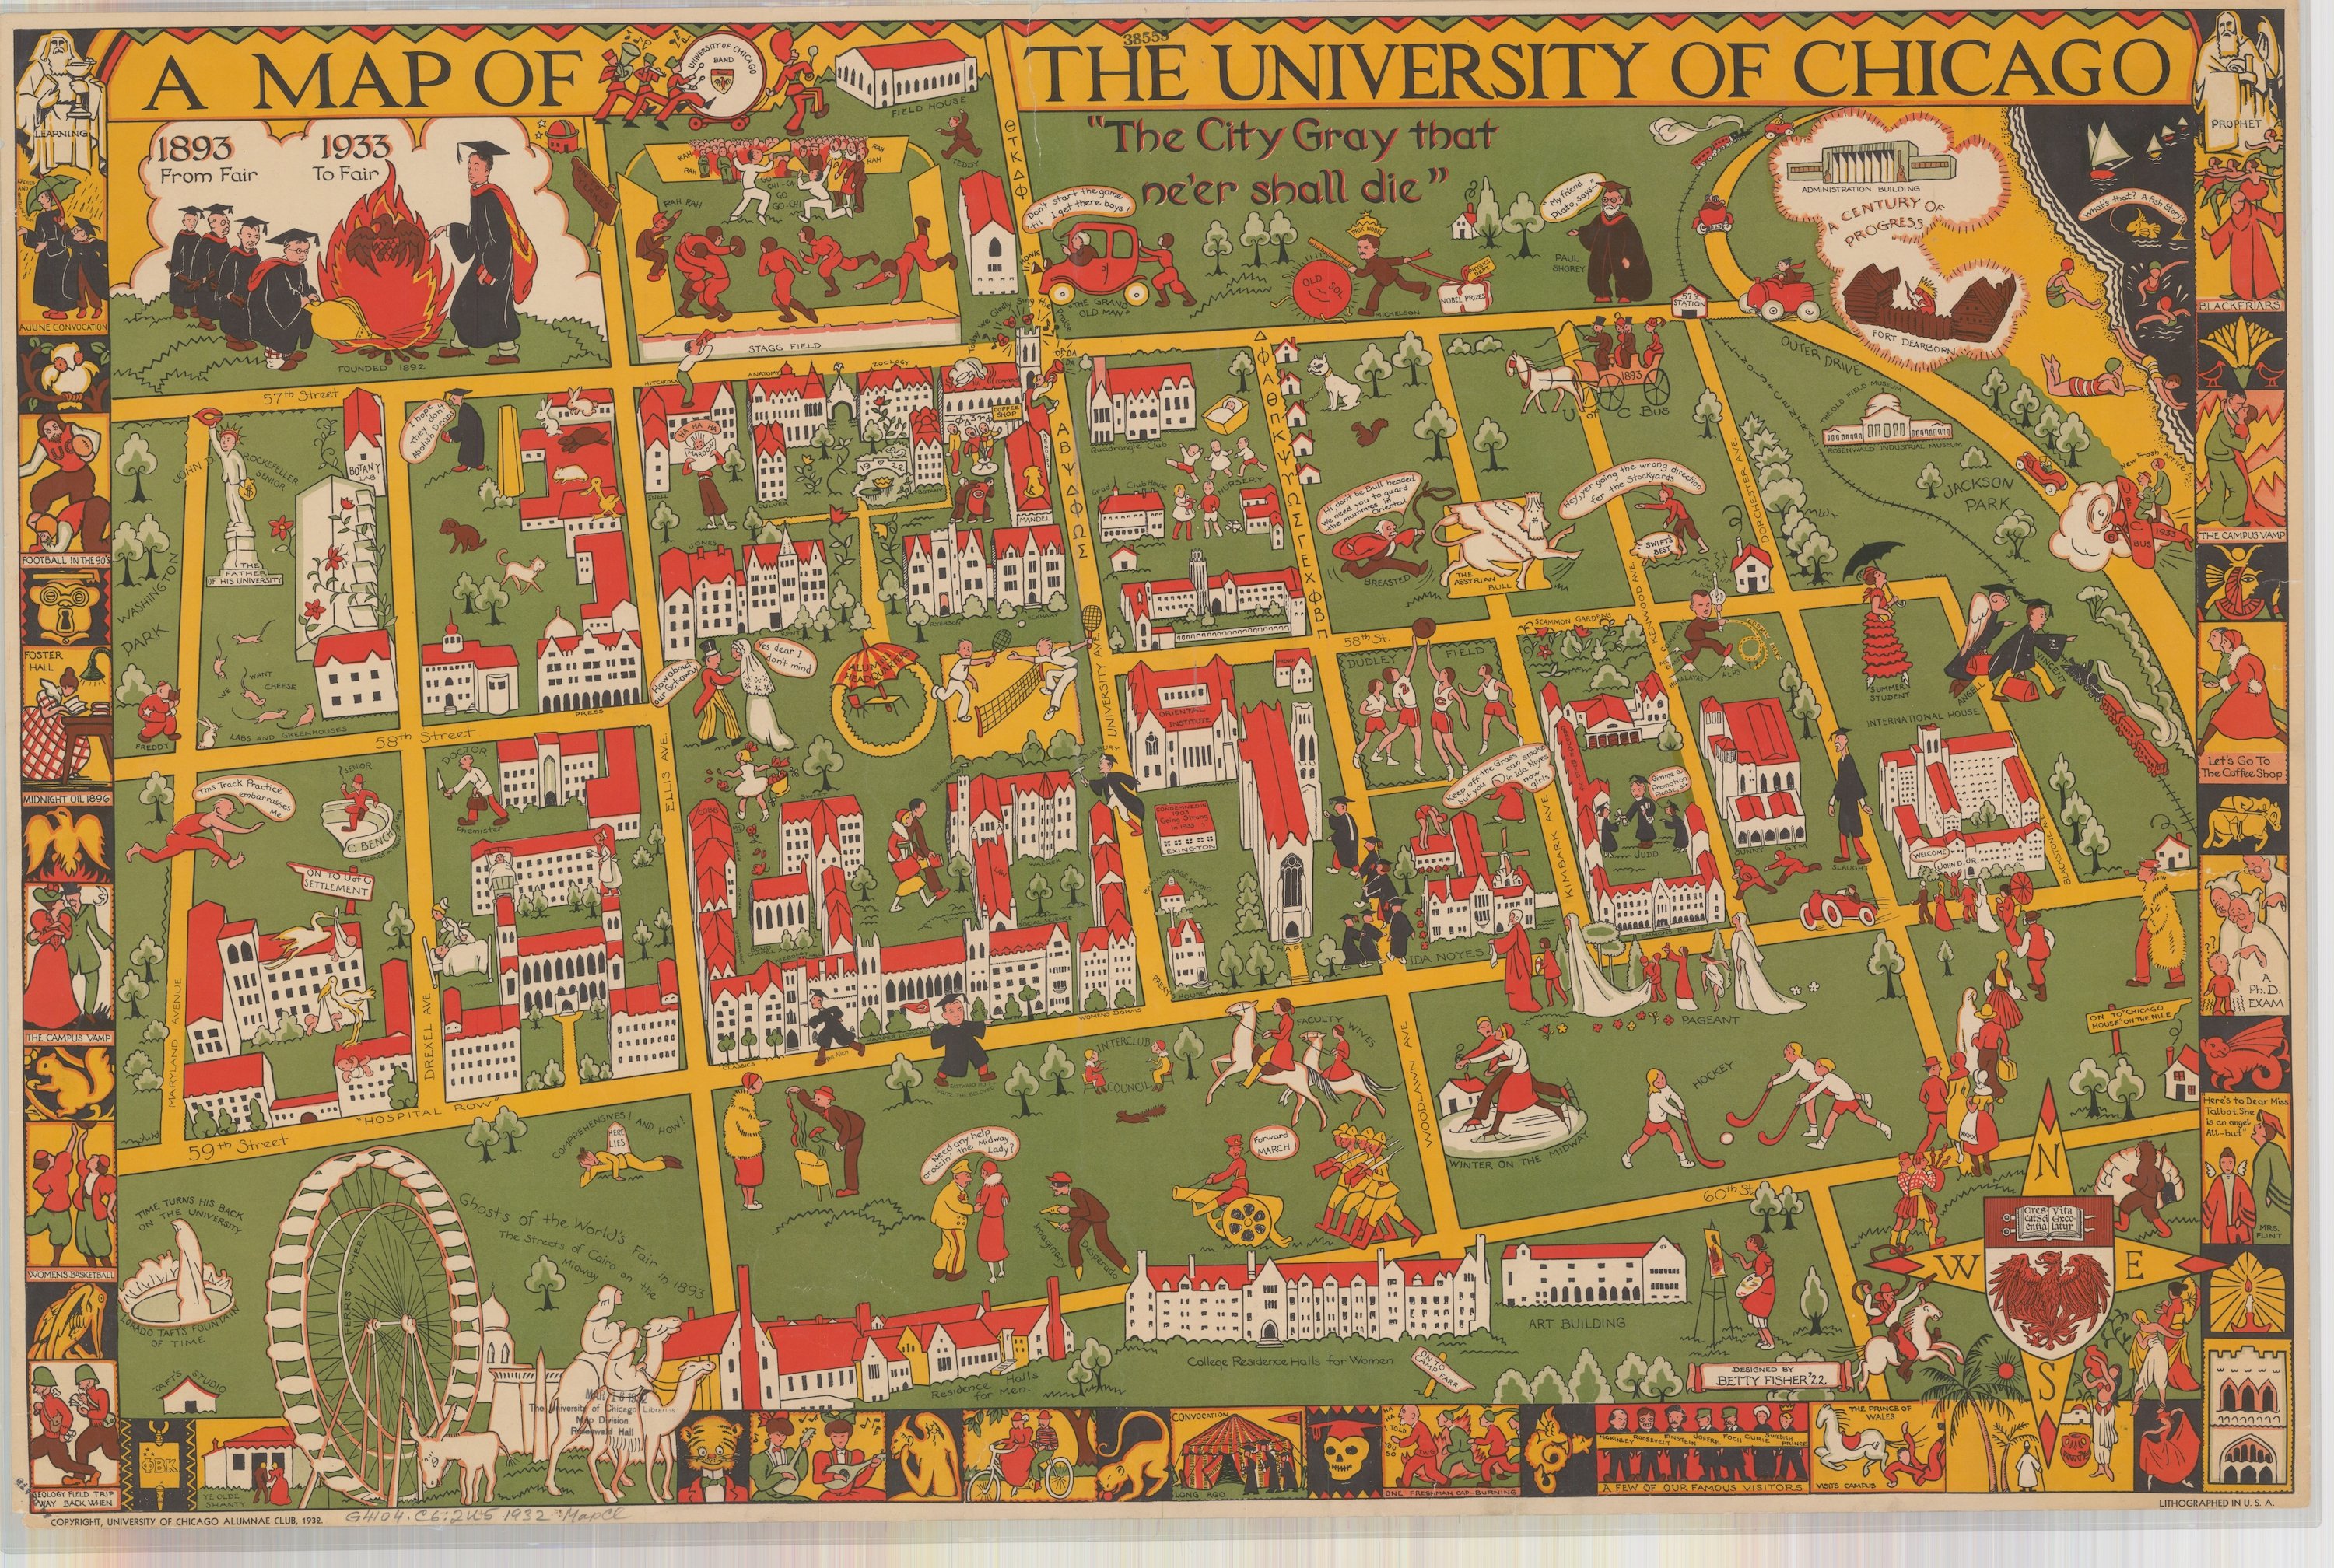 Pictorial Map of Campus - 1932